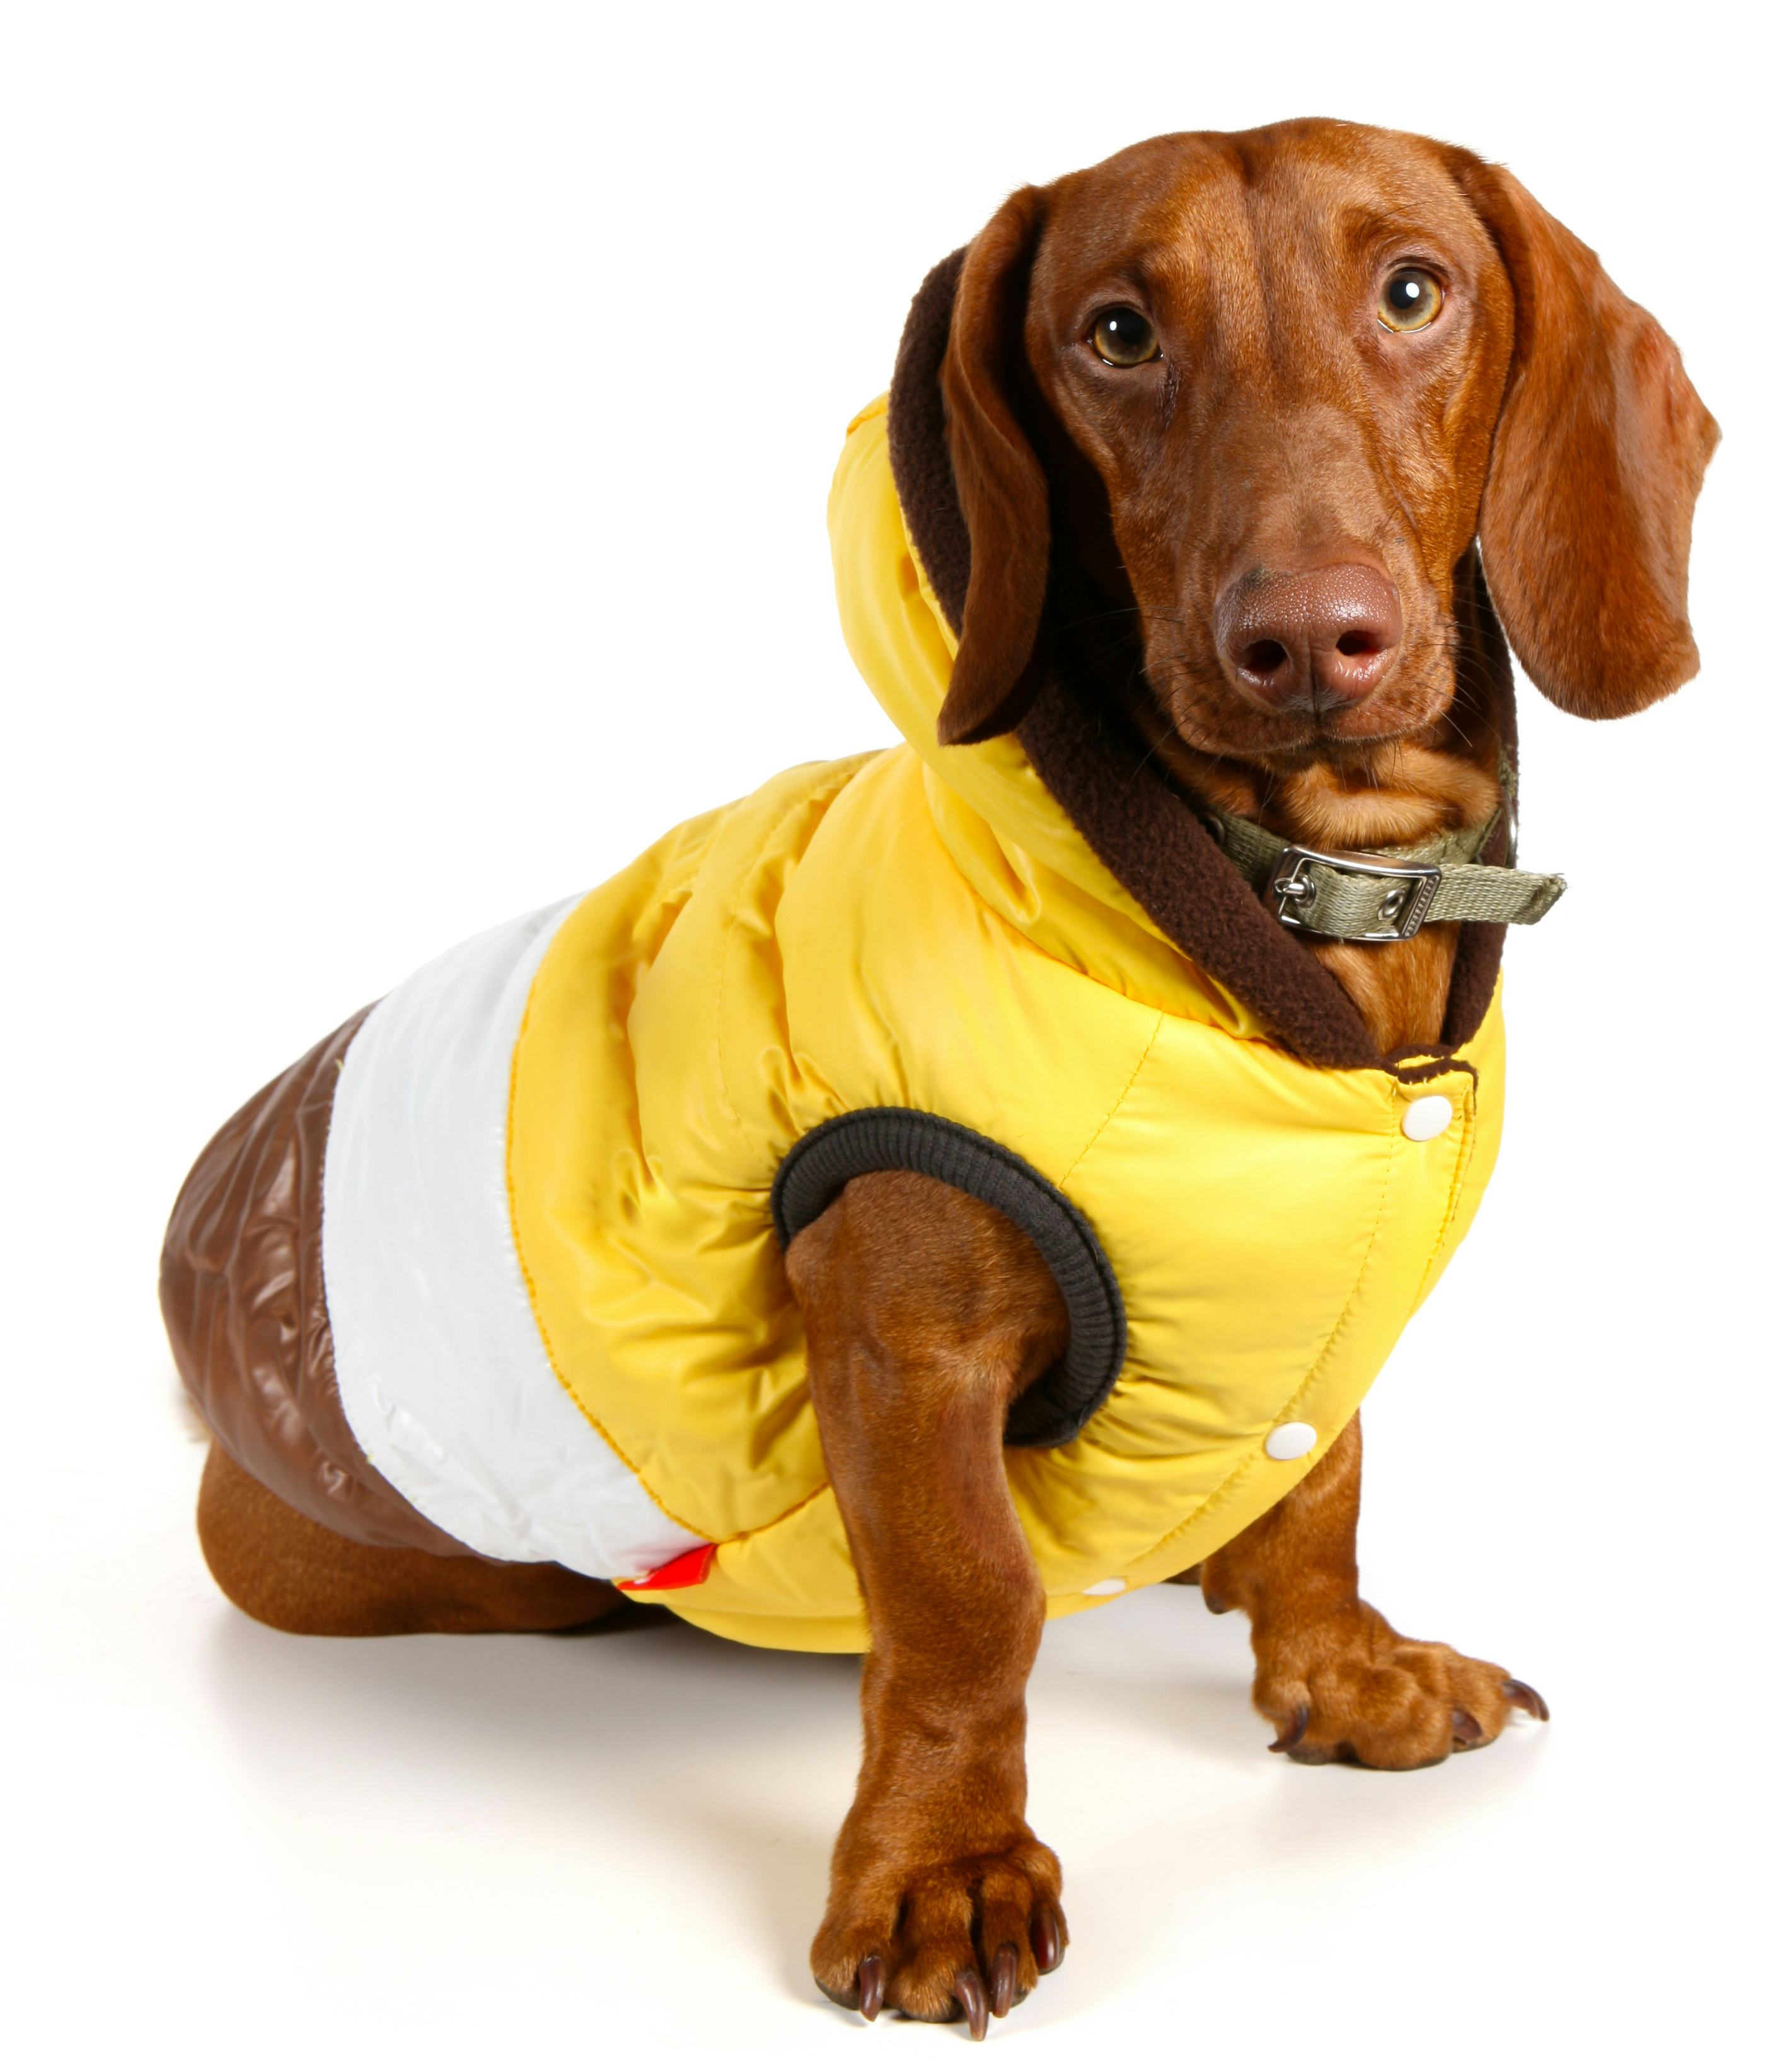 brown dog with brown eyes and a yellow jacket